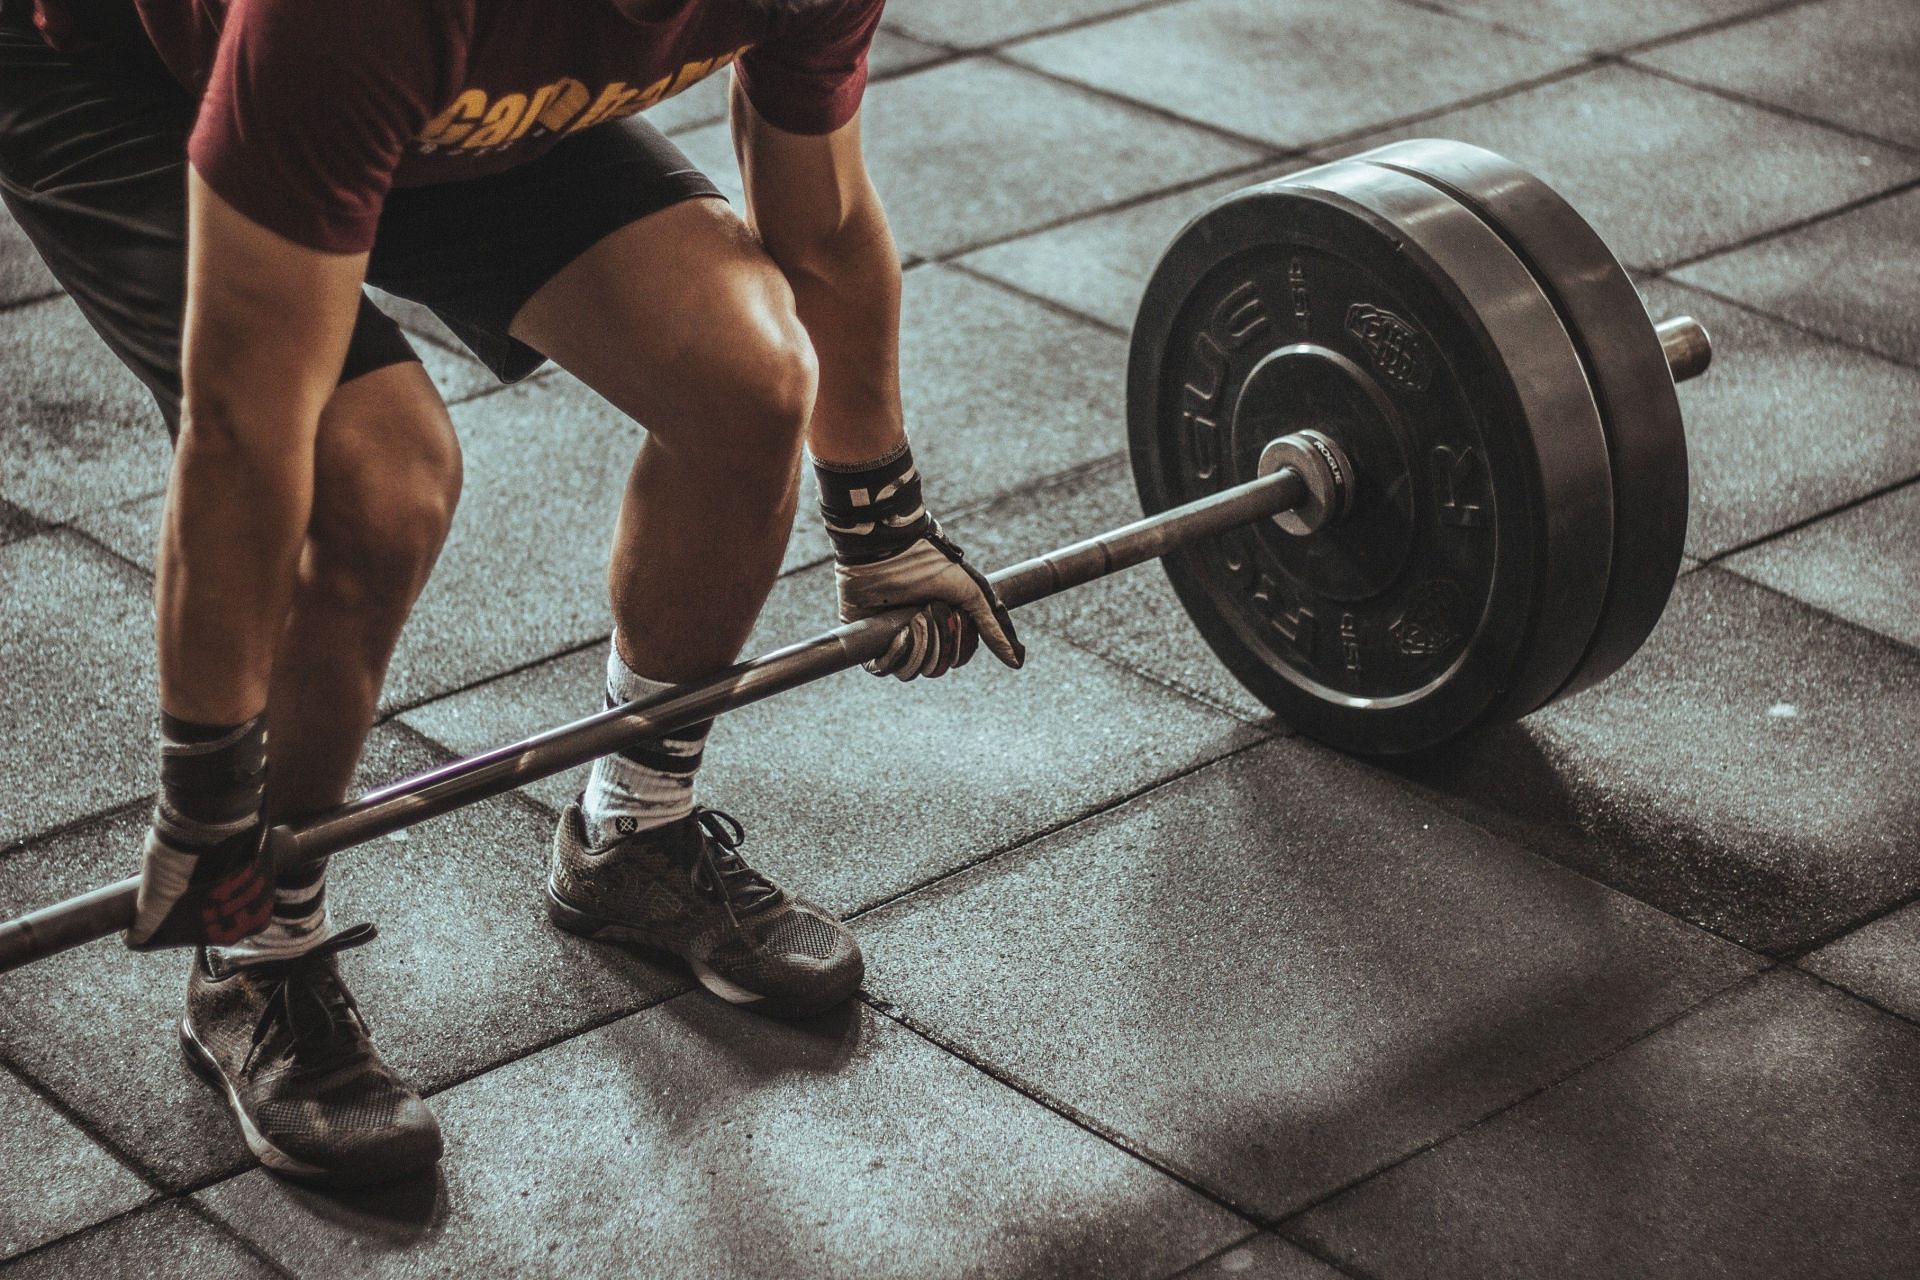 Crossfit workouts are high-intensity workouts that incorporate a combination of strength, cardio, gymnastics (Photo by Victor Freitas/pexels)